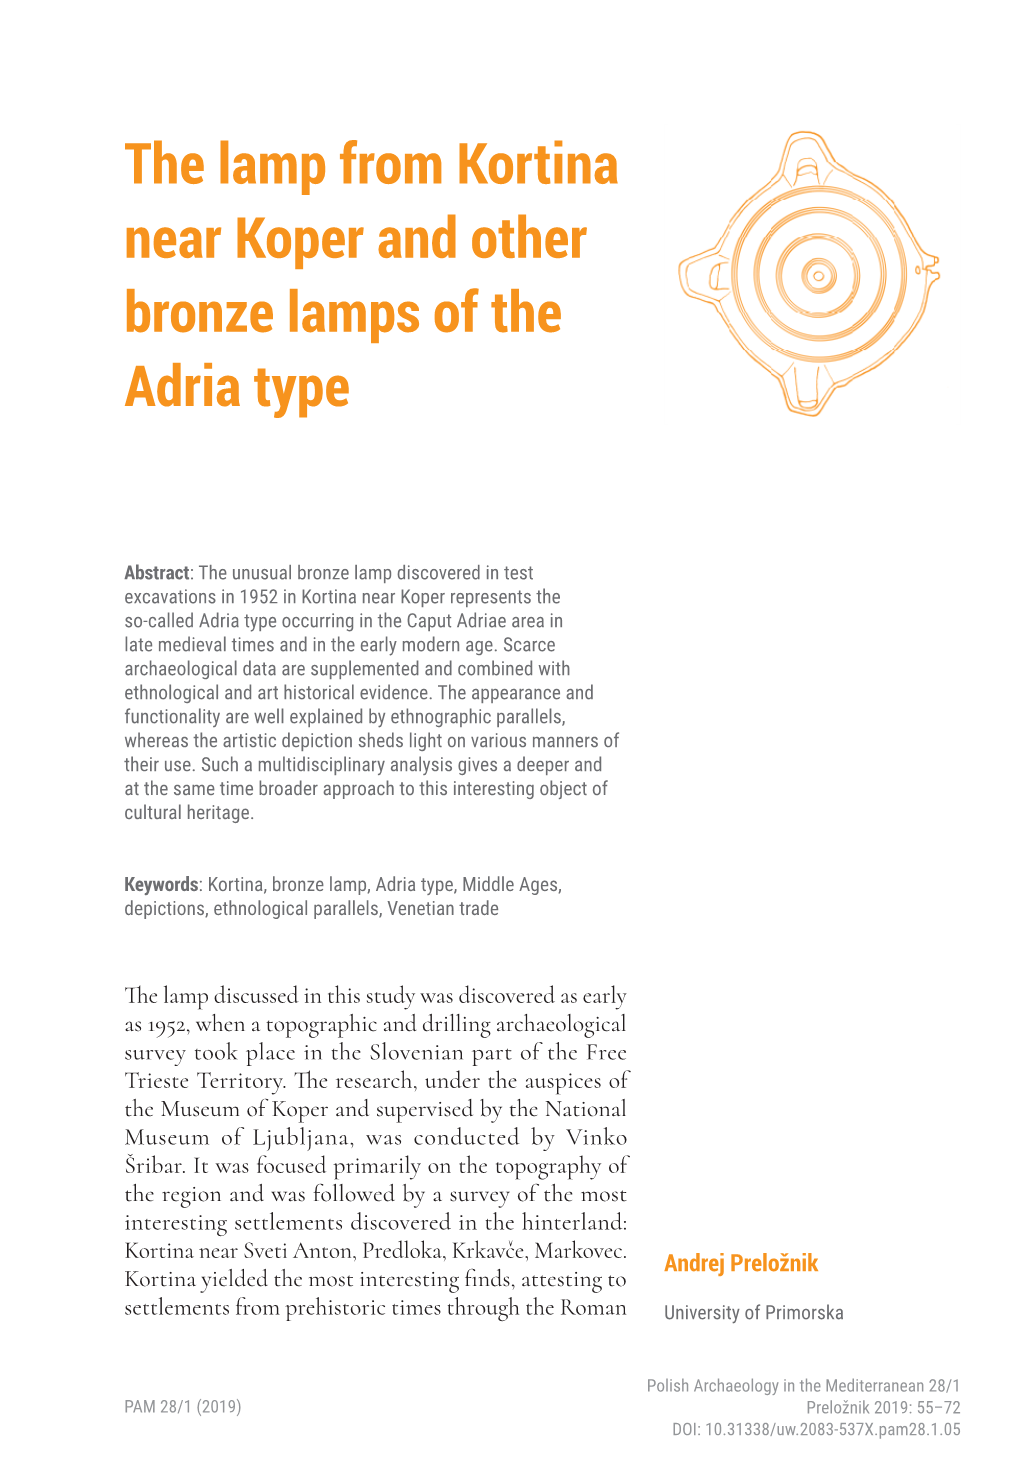 The Lamp from Kortina Near Koper and Other Bronze Lamps of the Adria Type